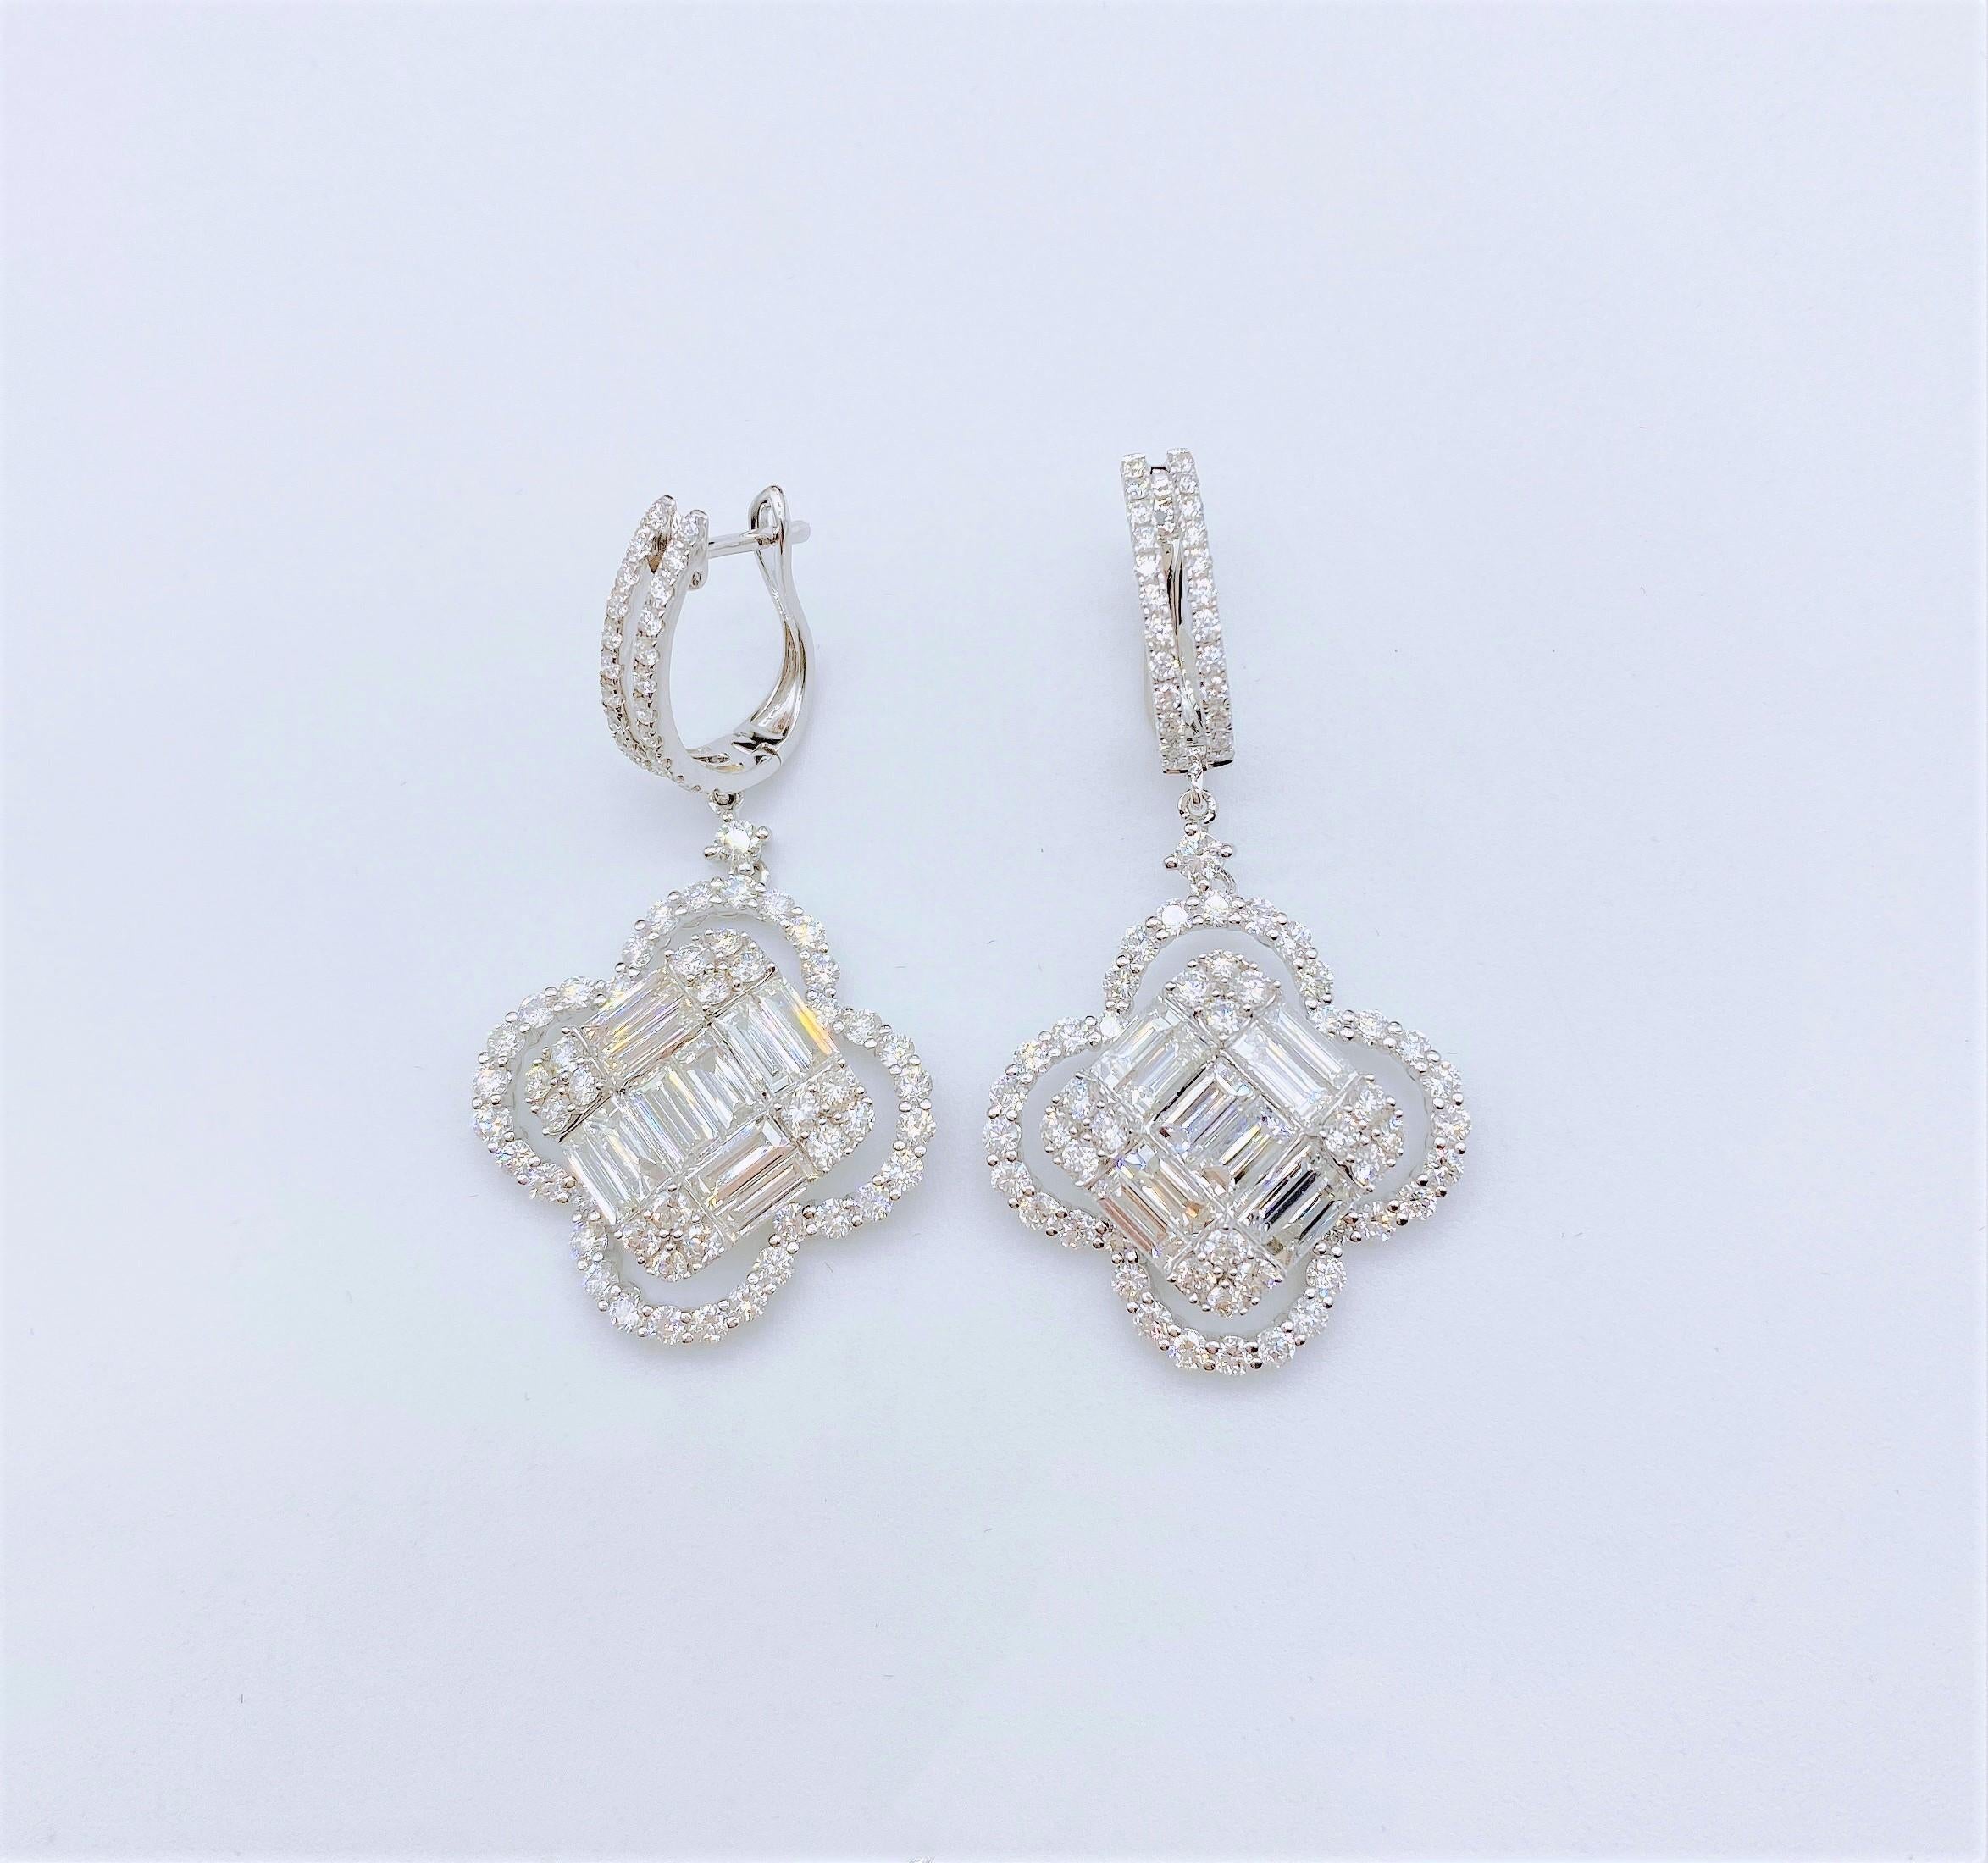 The Following Item we are offering are these Extremely Rare Beautiful 18KT Gold Fine Large Fancy Diamond Earrings comprised with approx 6CTS Carats of Fine Gorgeous Glittering Diamonds in the form of Alhambra Clovers!! The Diamonds are of Exquisite